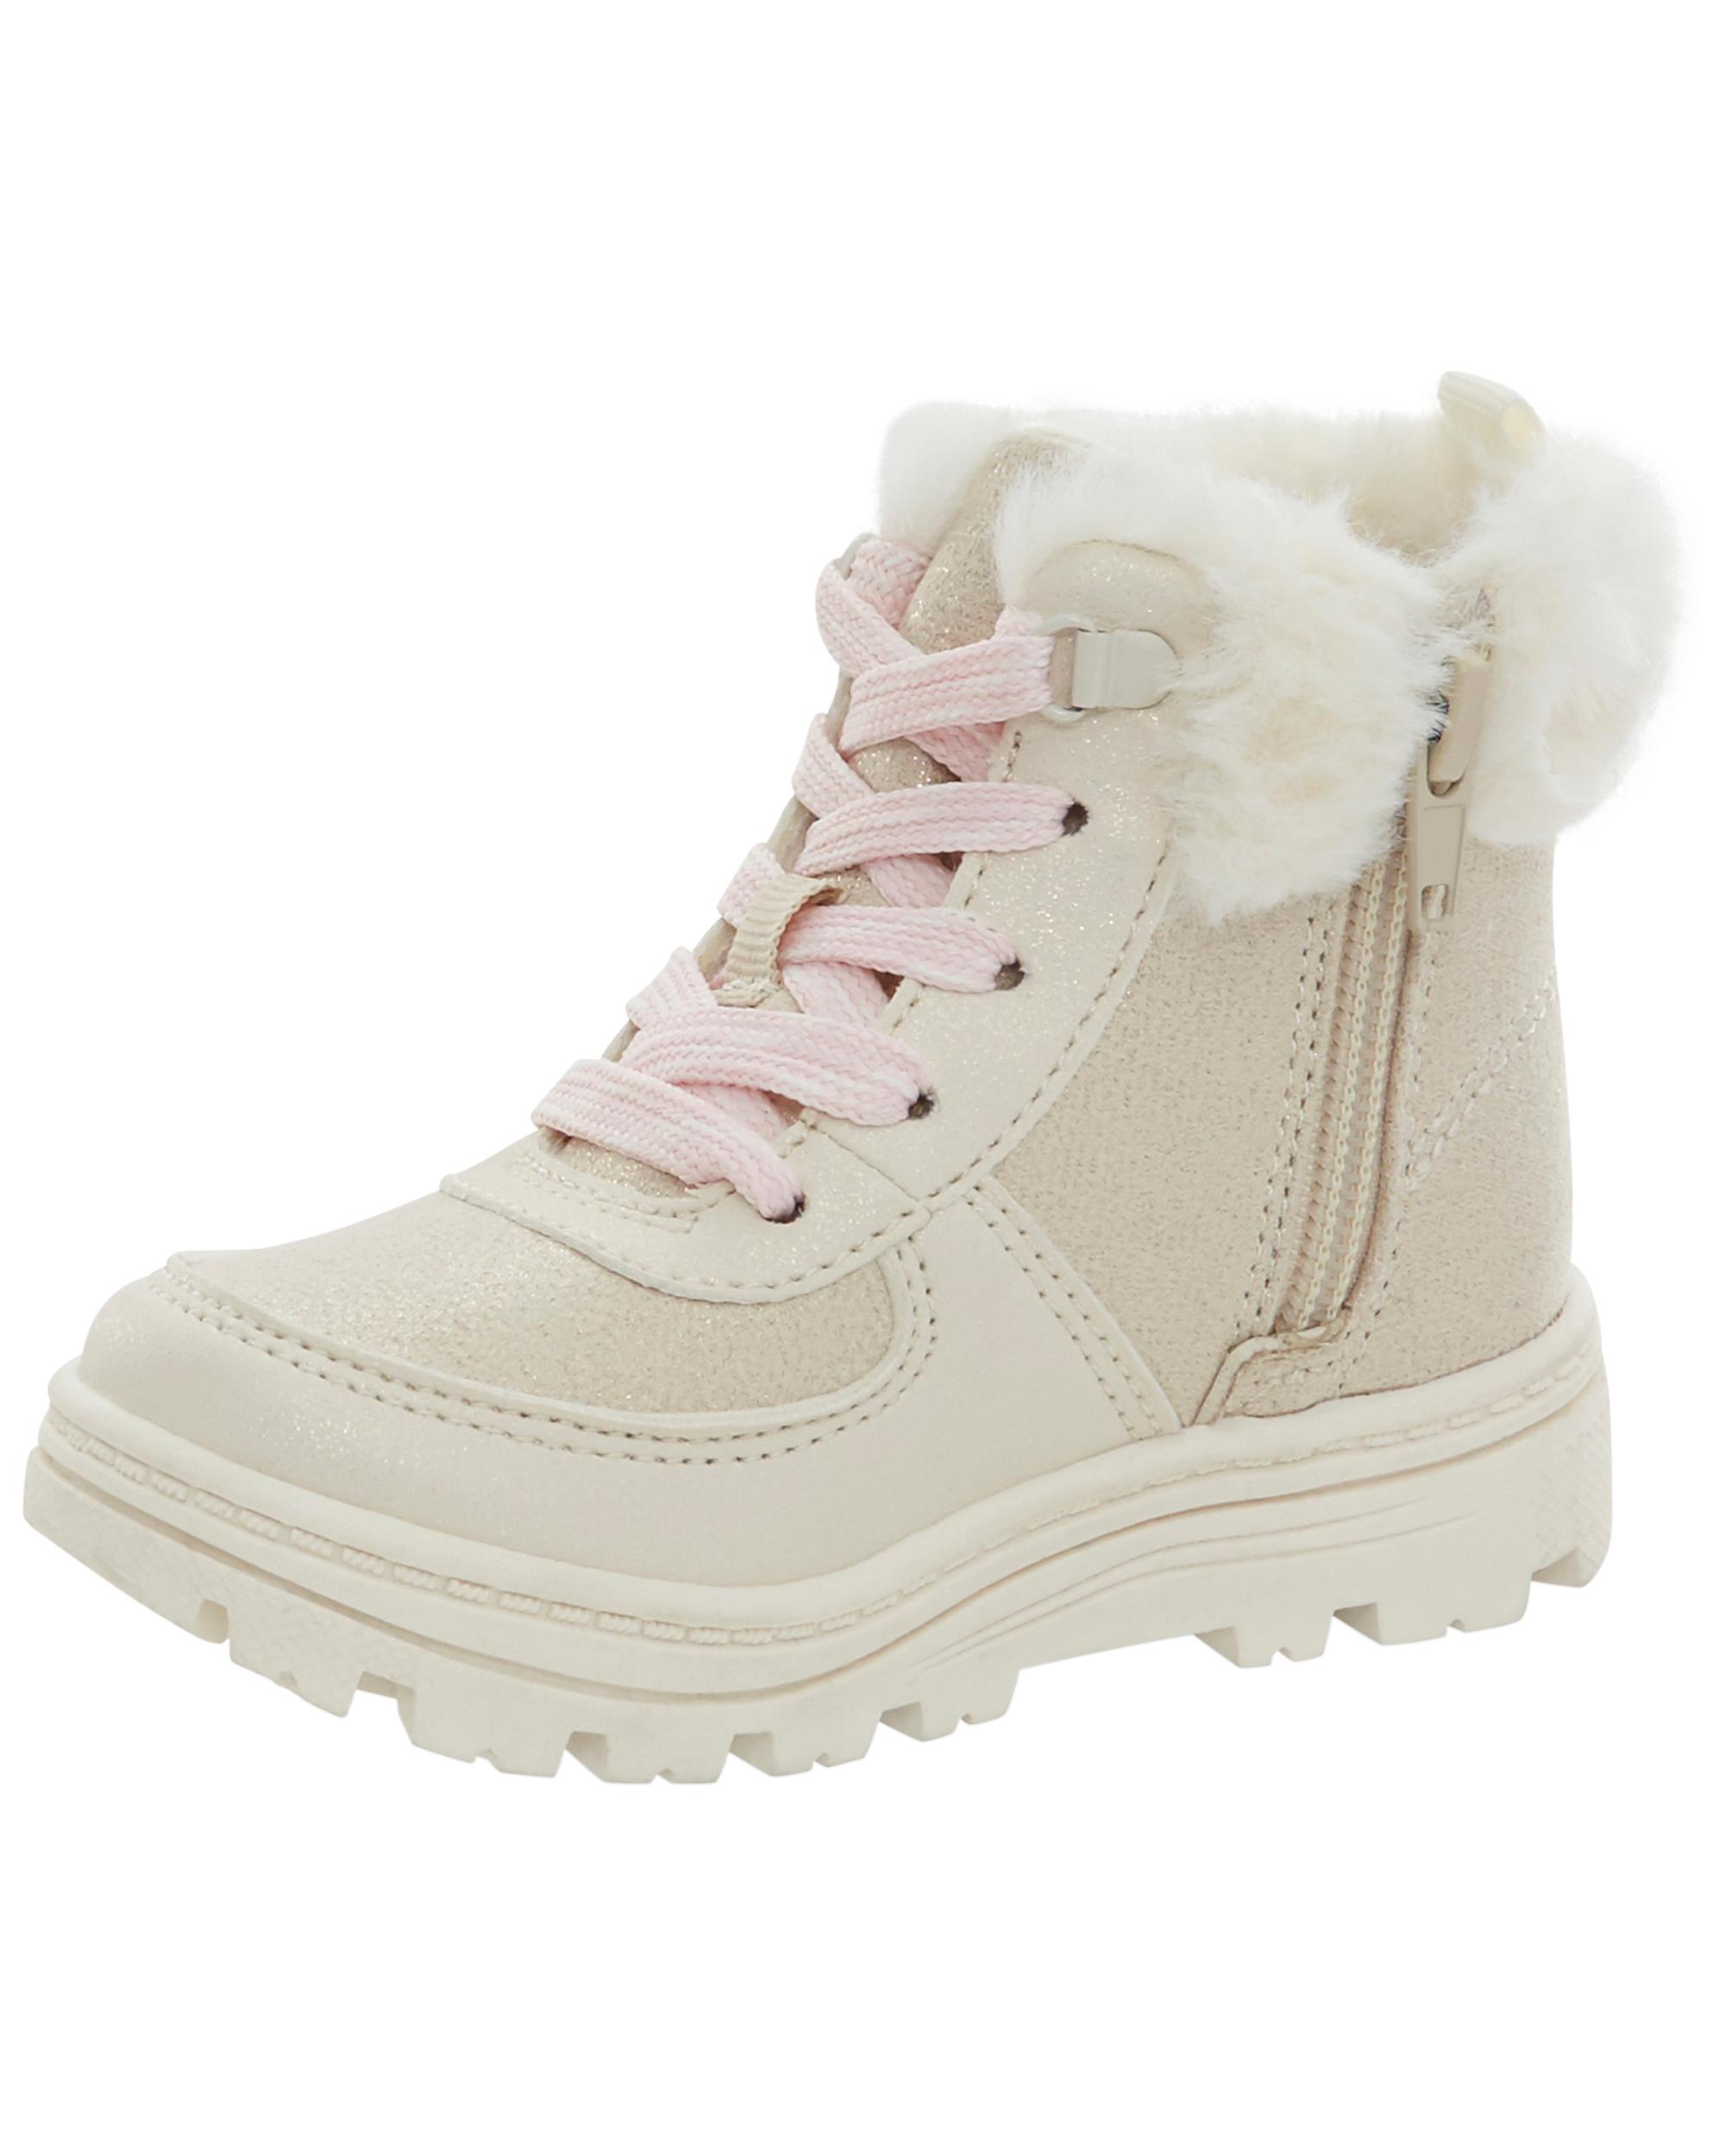 Toddler Faux Fur Hiking Boots